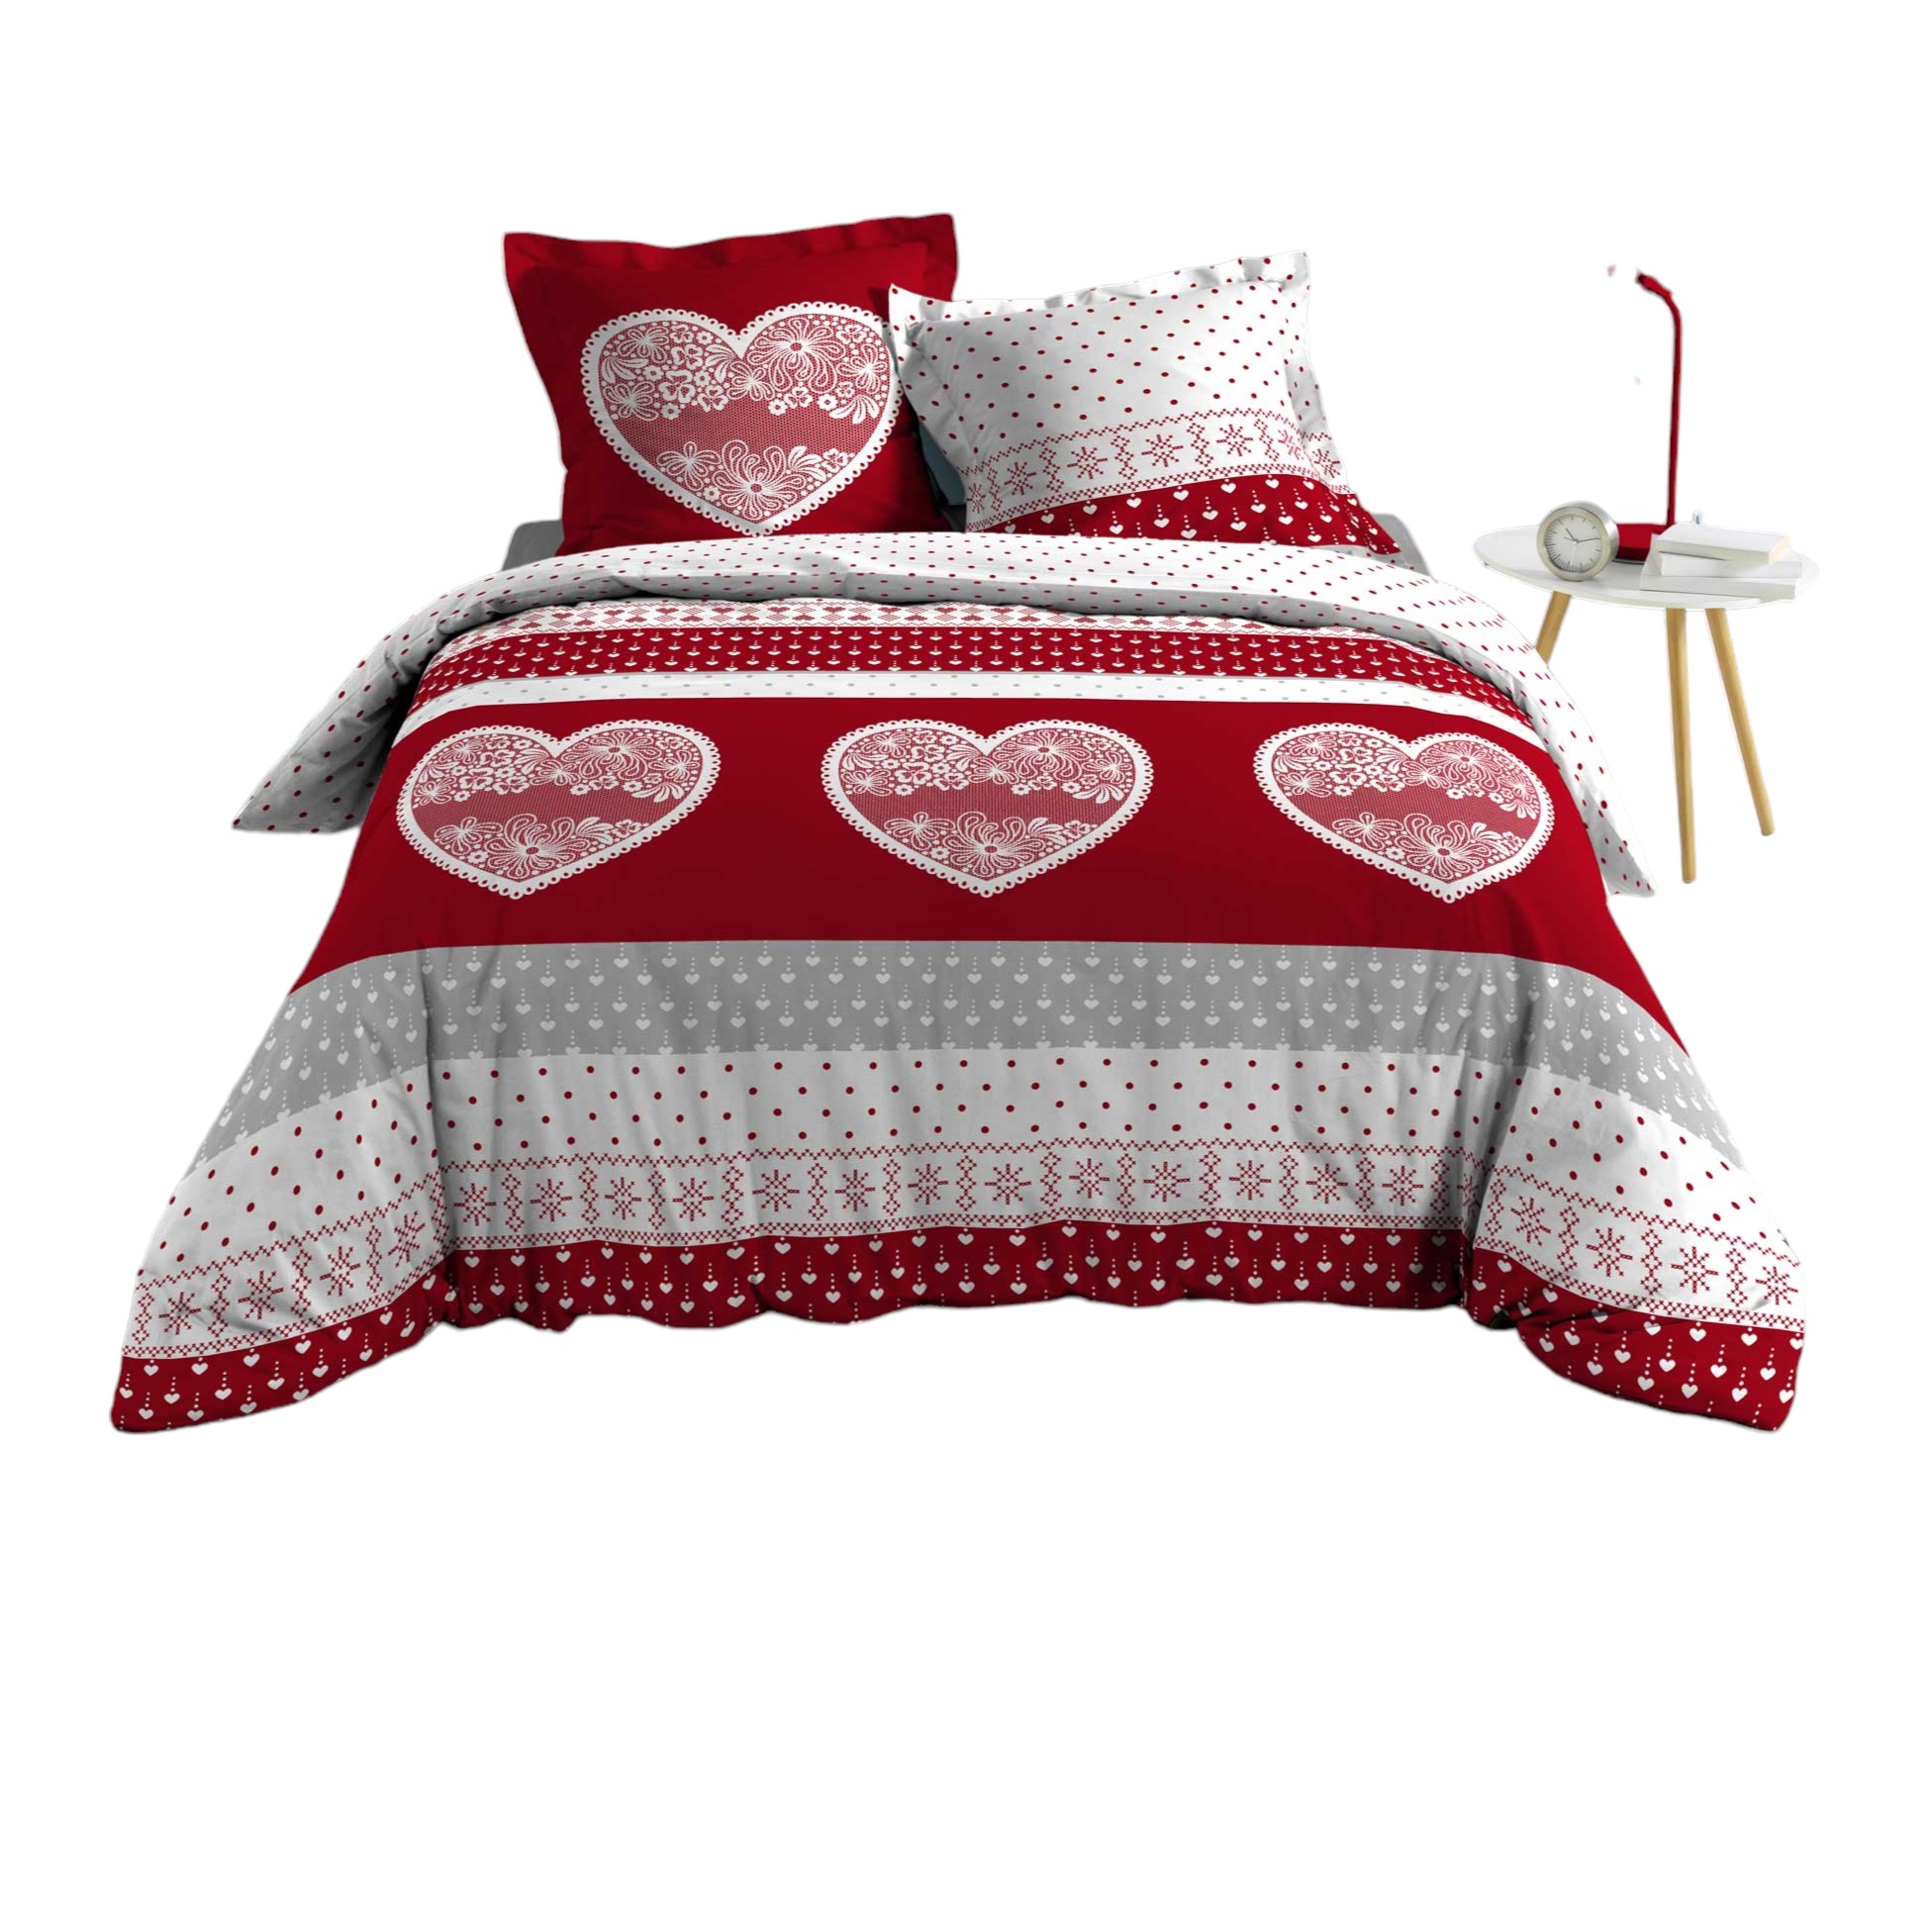 Housse couette + taies 220 x 240 cm Passionement coeur